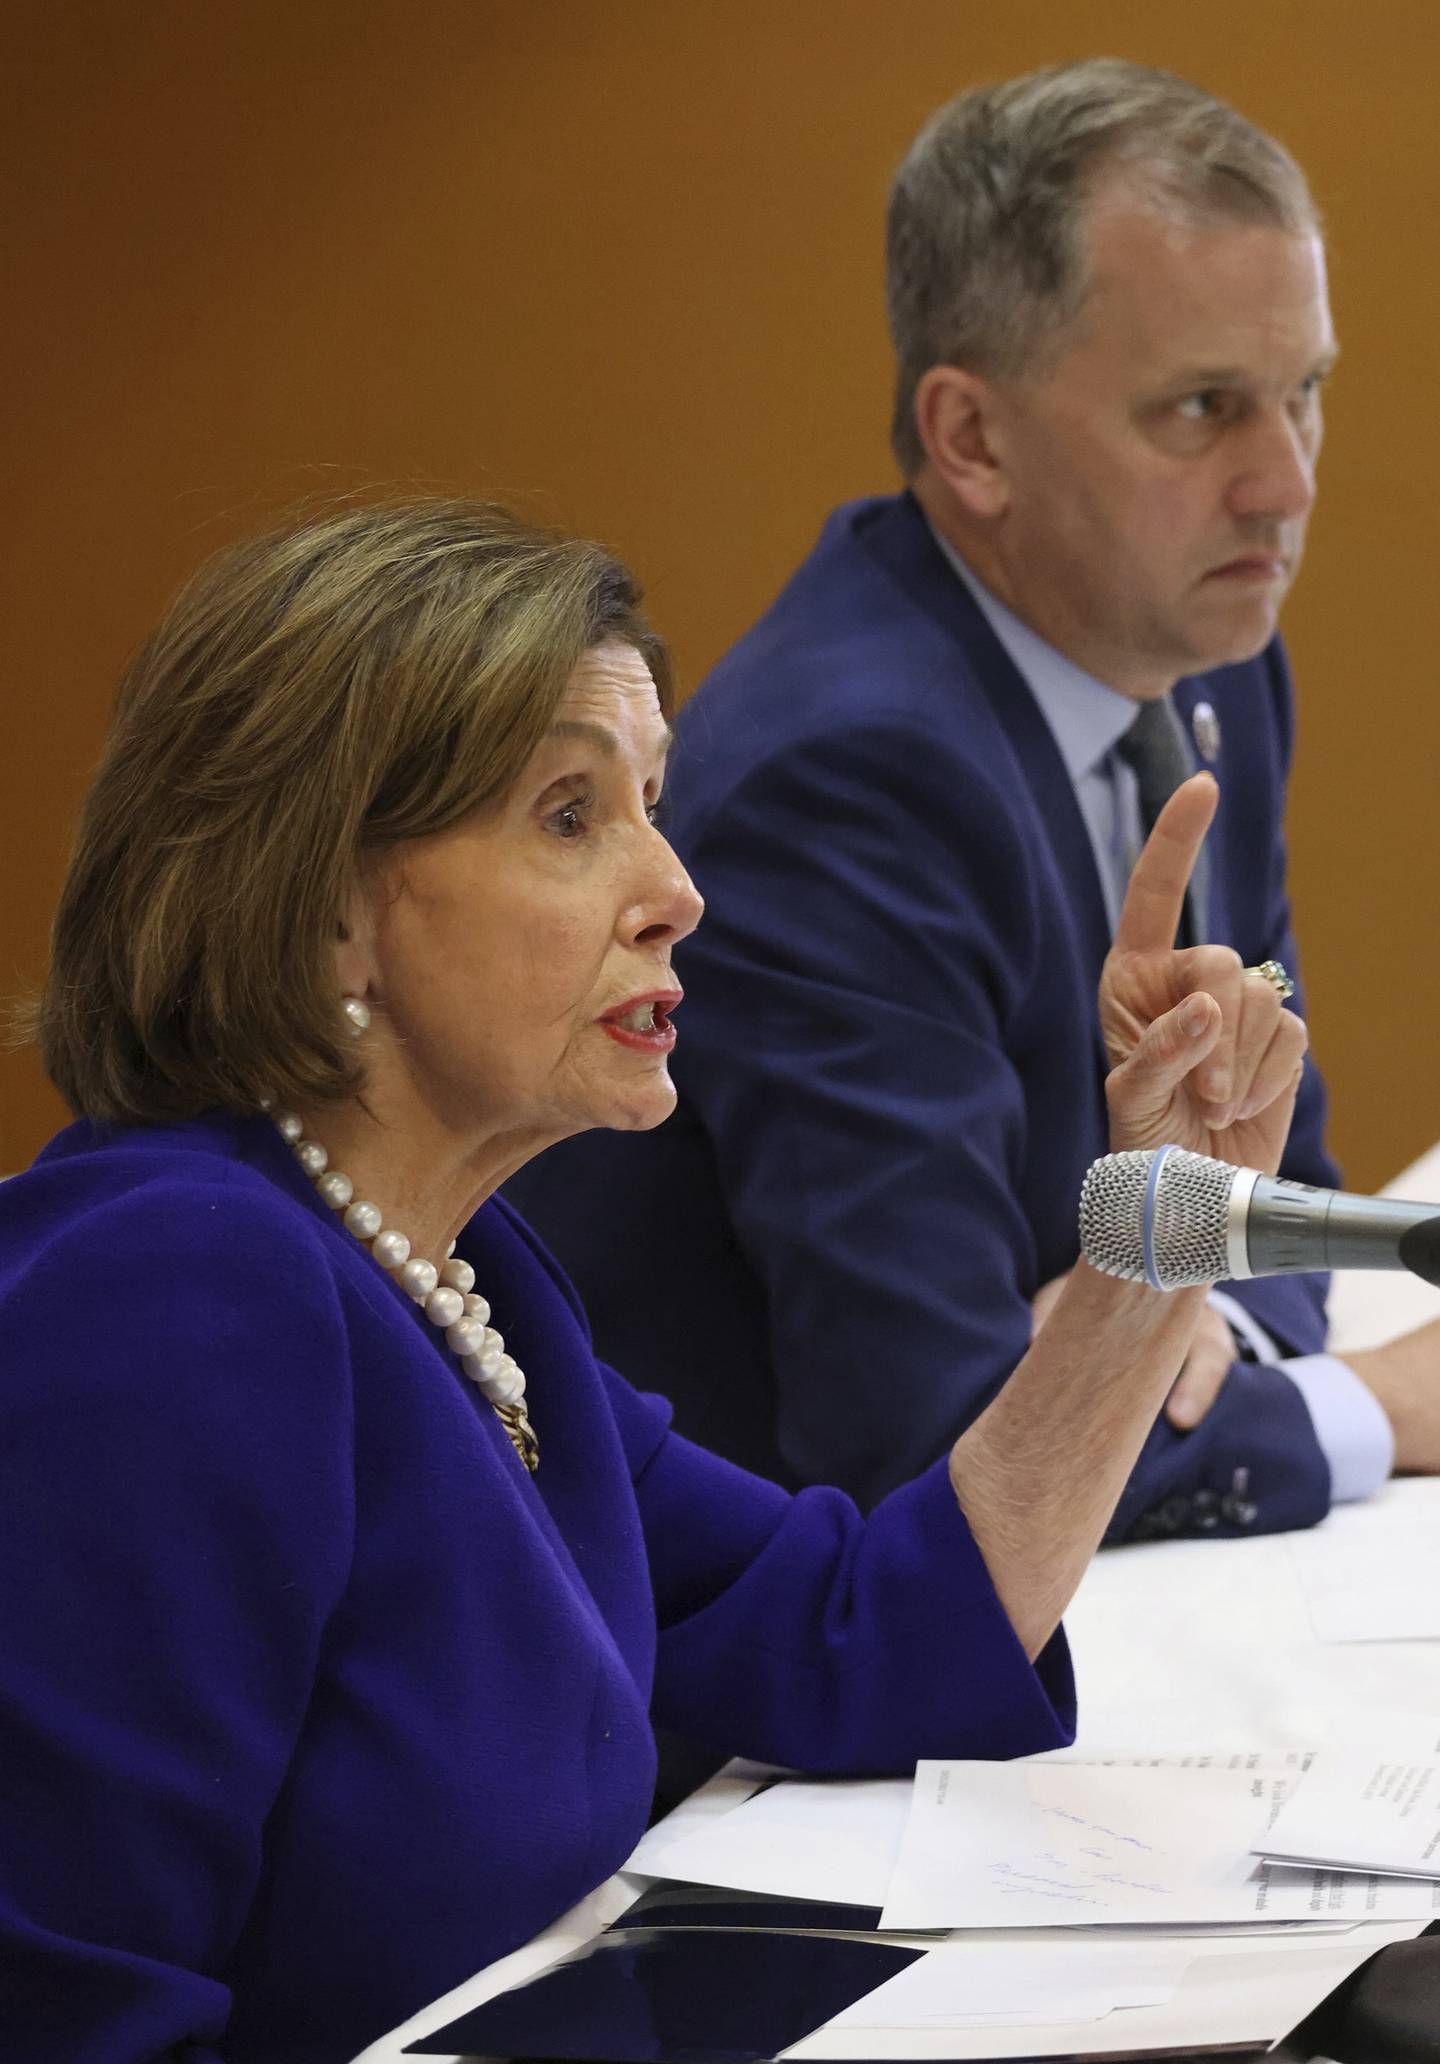 House Speaker Nancy Pelosi joins U.S. Rep. Sean Casten at Advocate Good Samaritan Hospital for a discussion on reproductive rights on Oct. 21, 2022.